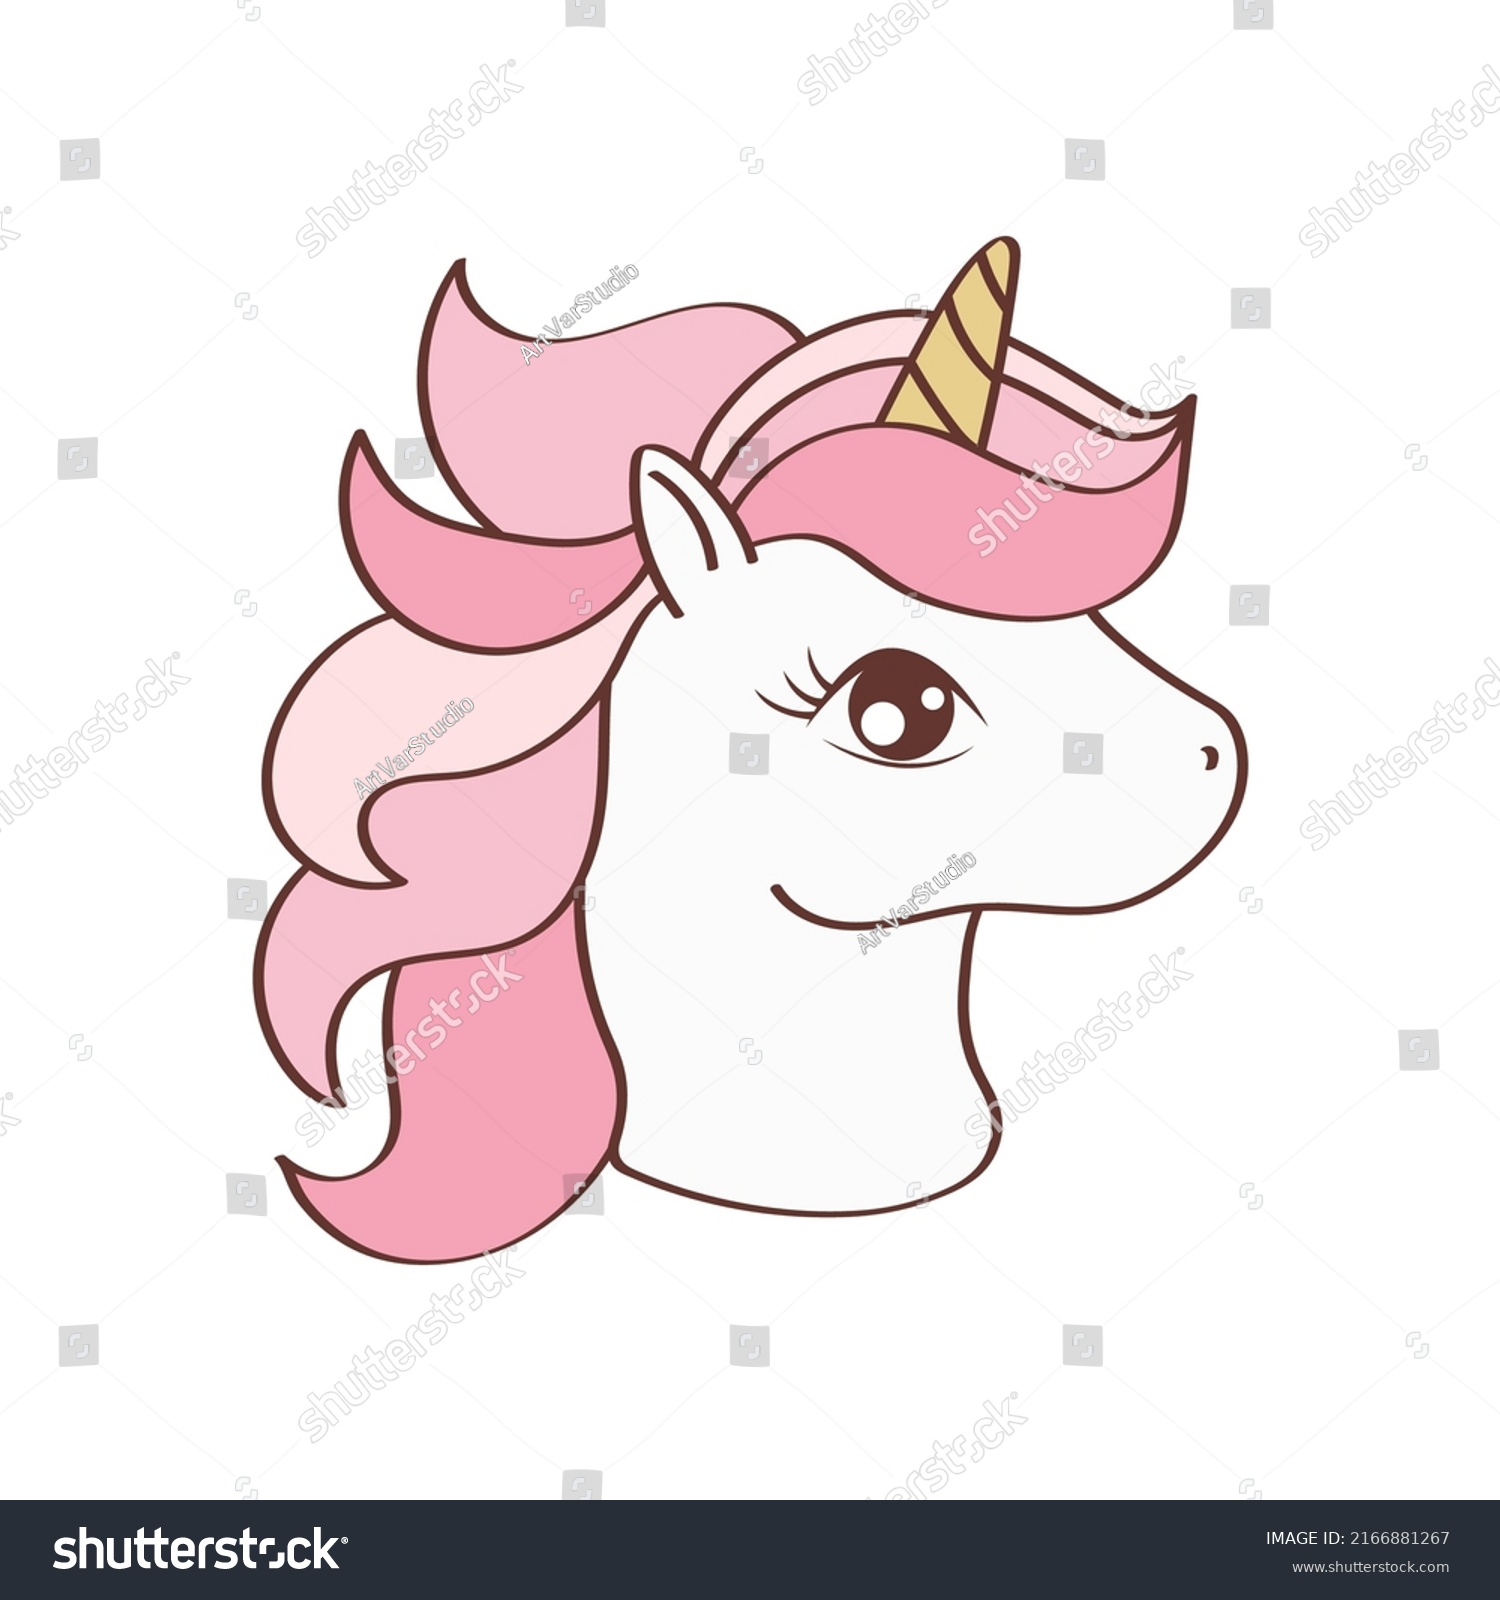 SVG of Unicorn Face Clipart Character Design. Adorable Clip Art Unicorn Head. Vector Illustration of an Animal for Prints for Clothes, Stickers, Baby Shower Invitation.  svg